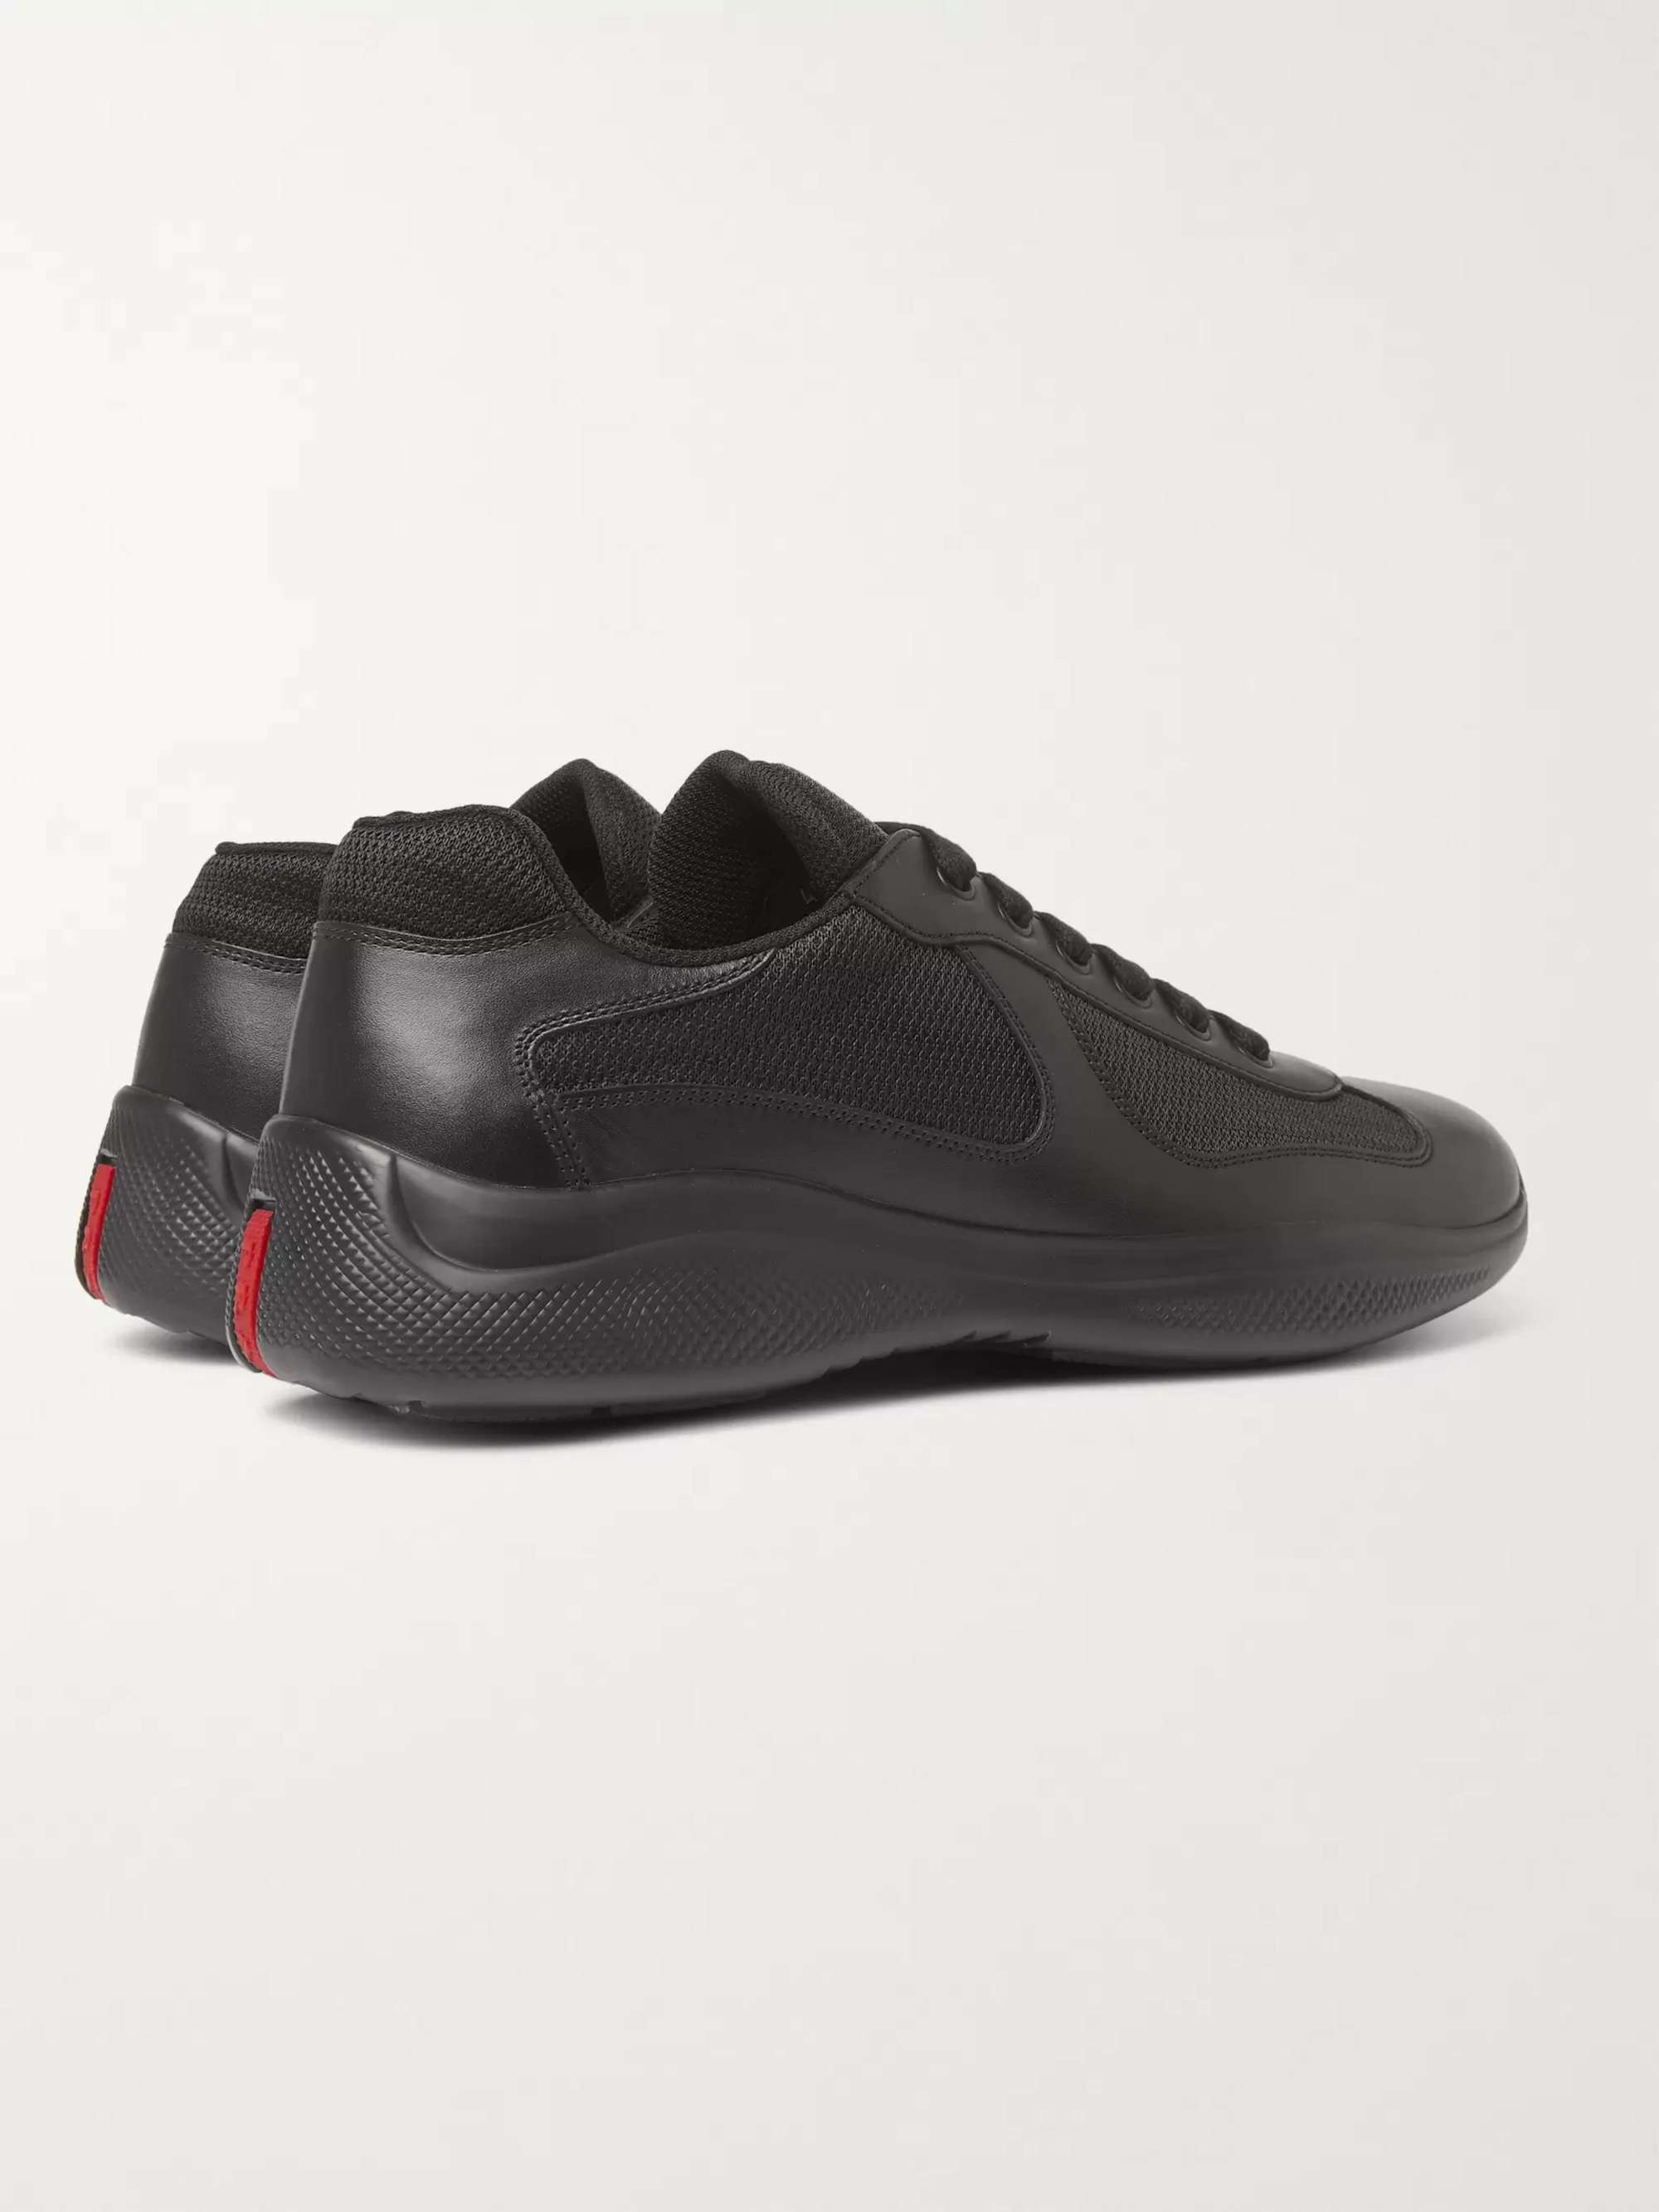 PRADA America's Cup Leather and Mesh Sneakers